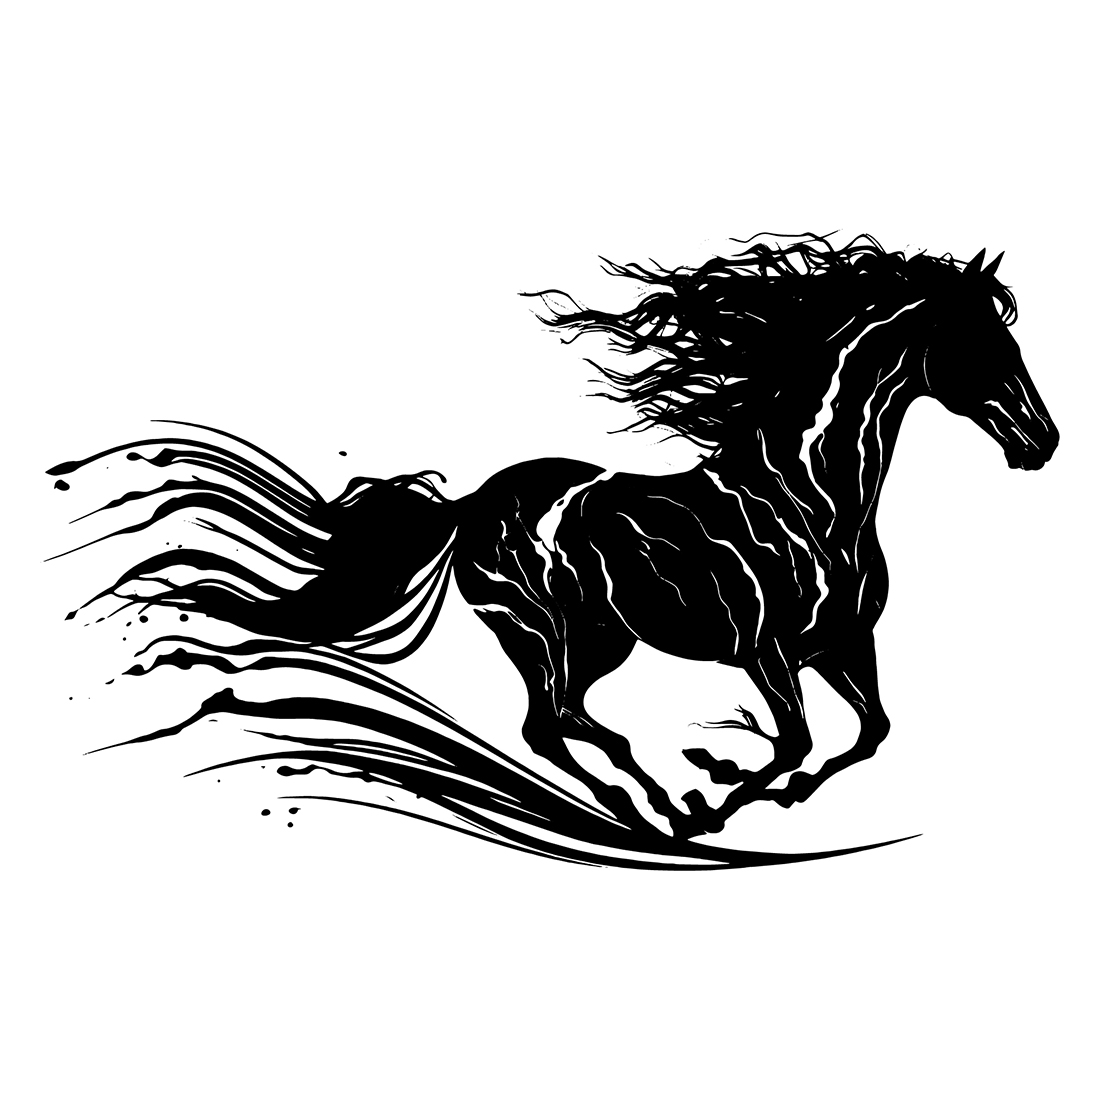 Black and white picture of a running horse.